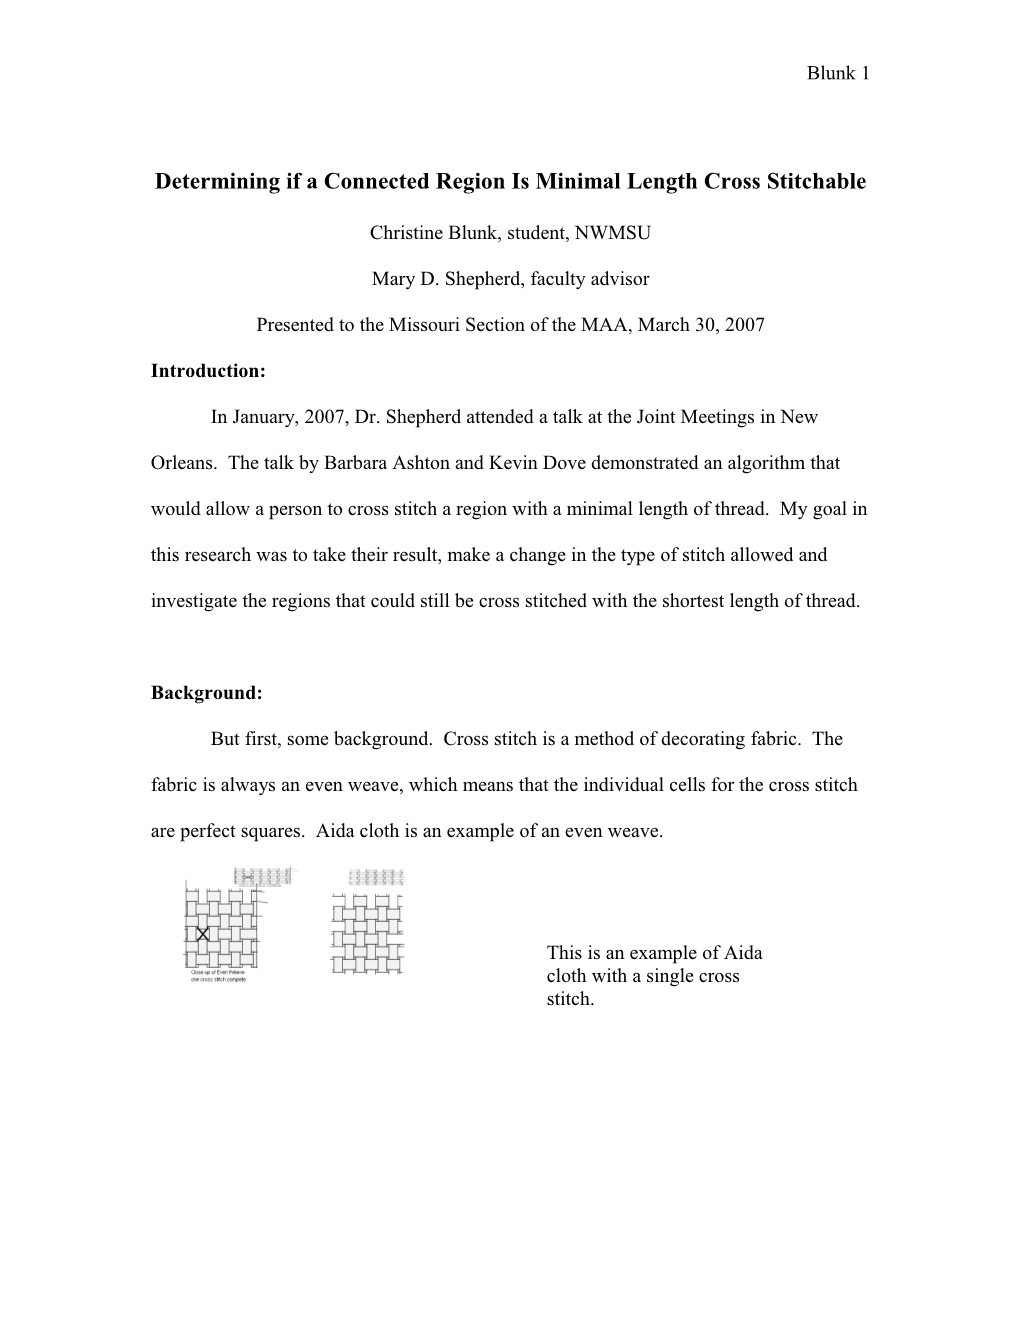 Determining If a Connected Region Is Minimal Length Cross Stitchable